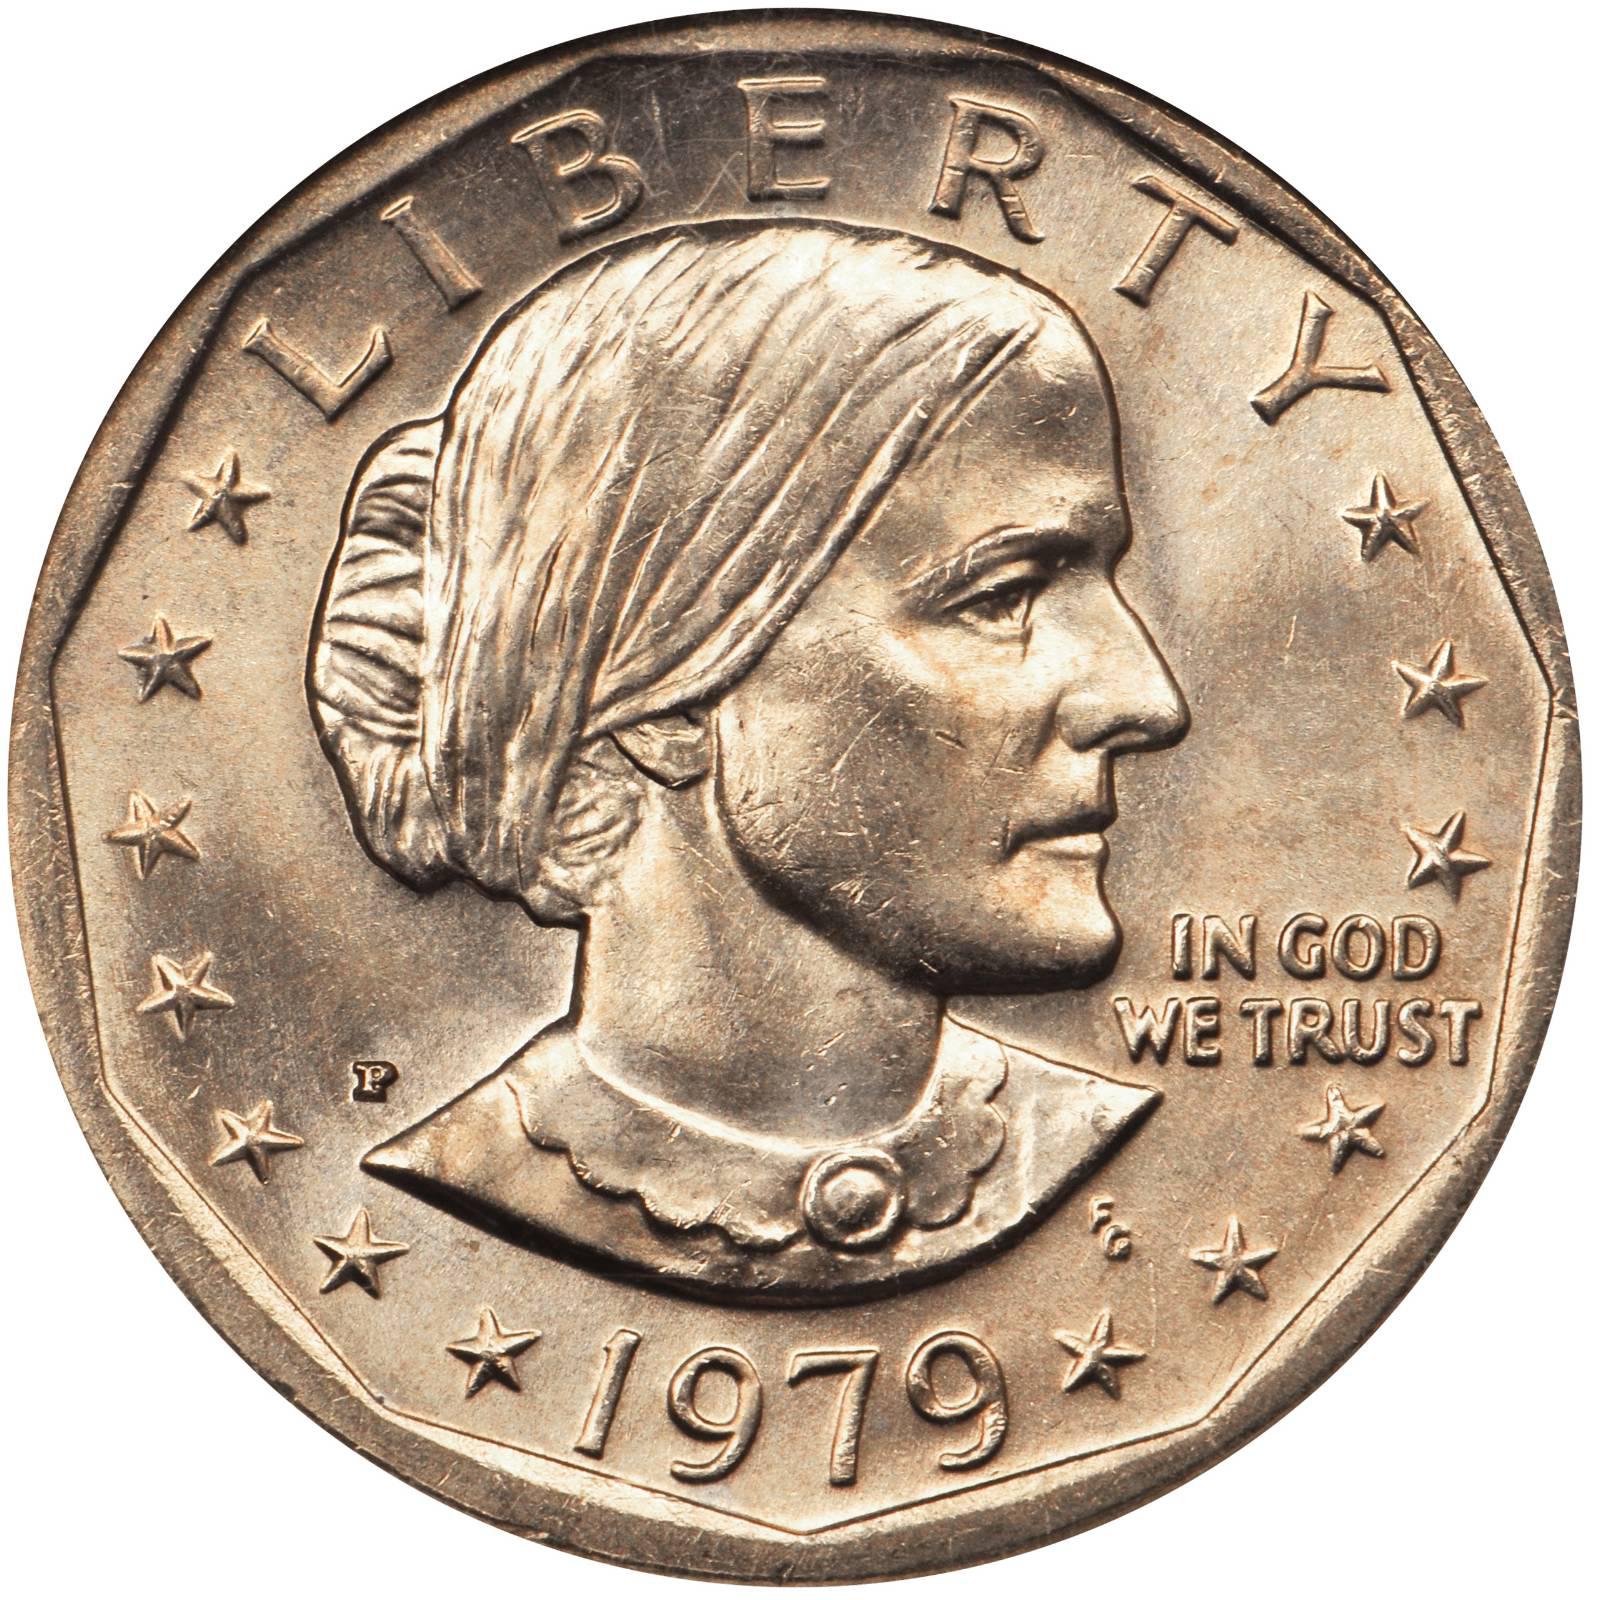 susan b anthony 1979 coin value